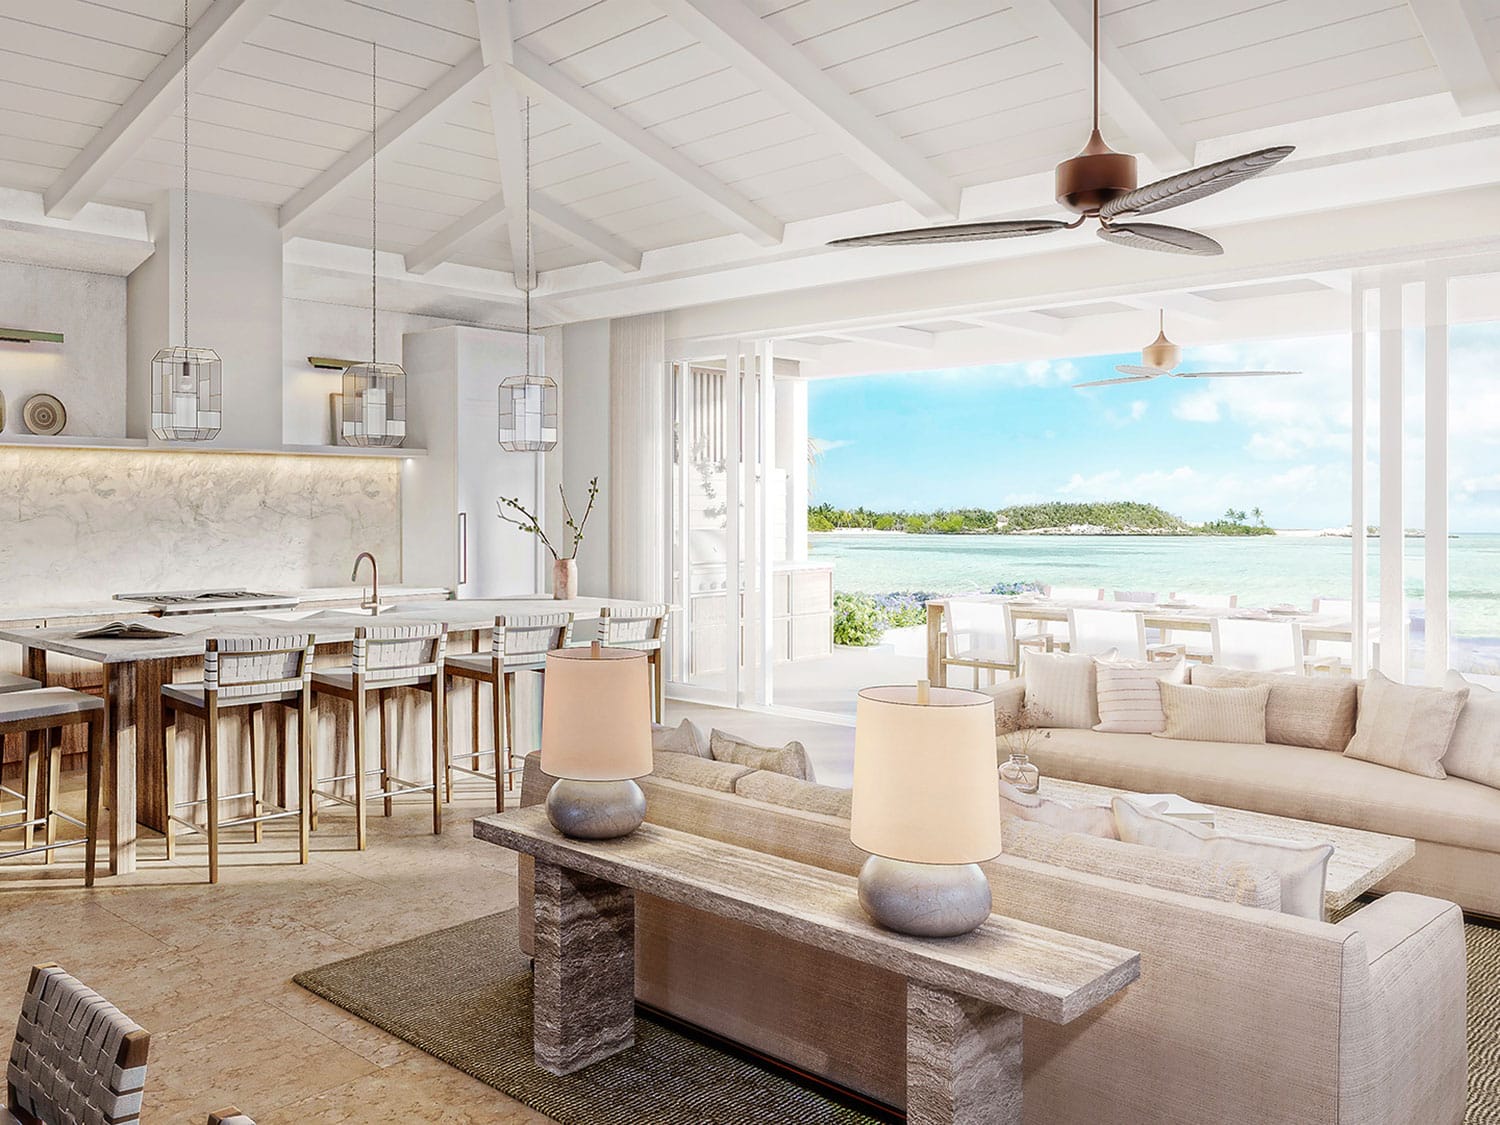 The interior space of Jasmine, a home in The Residences at Montage Cay, in the Abacos, Bahamas.